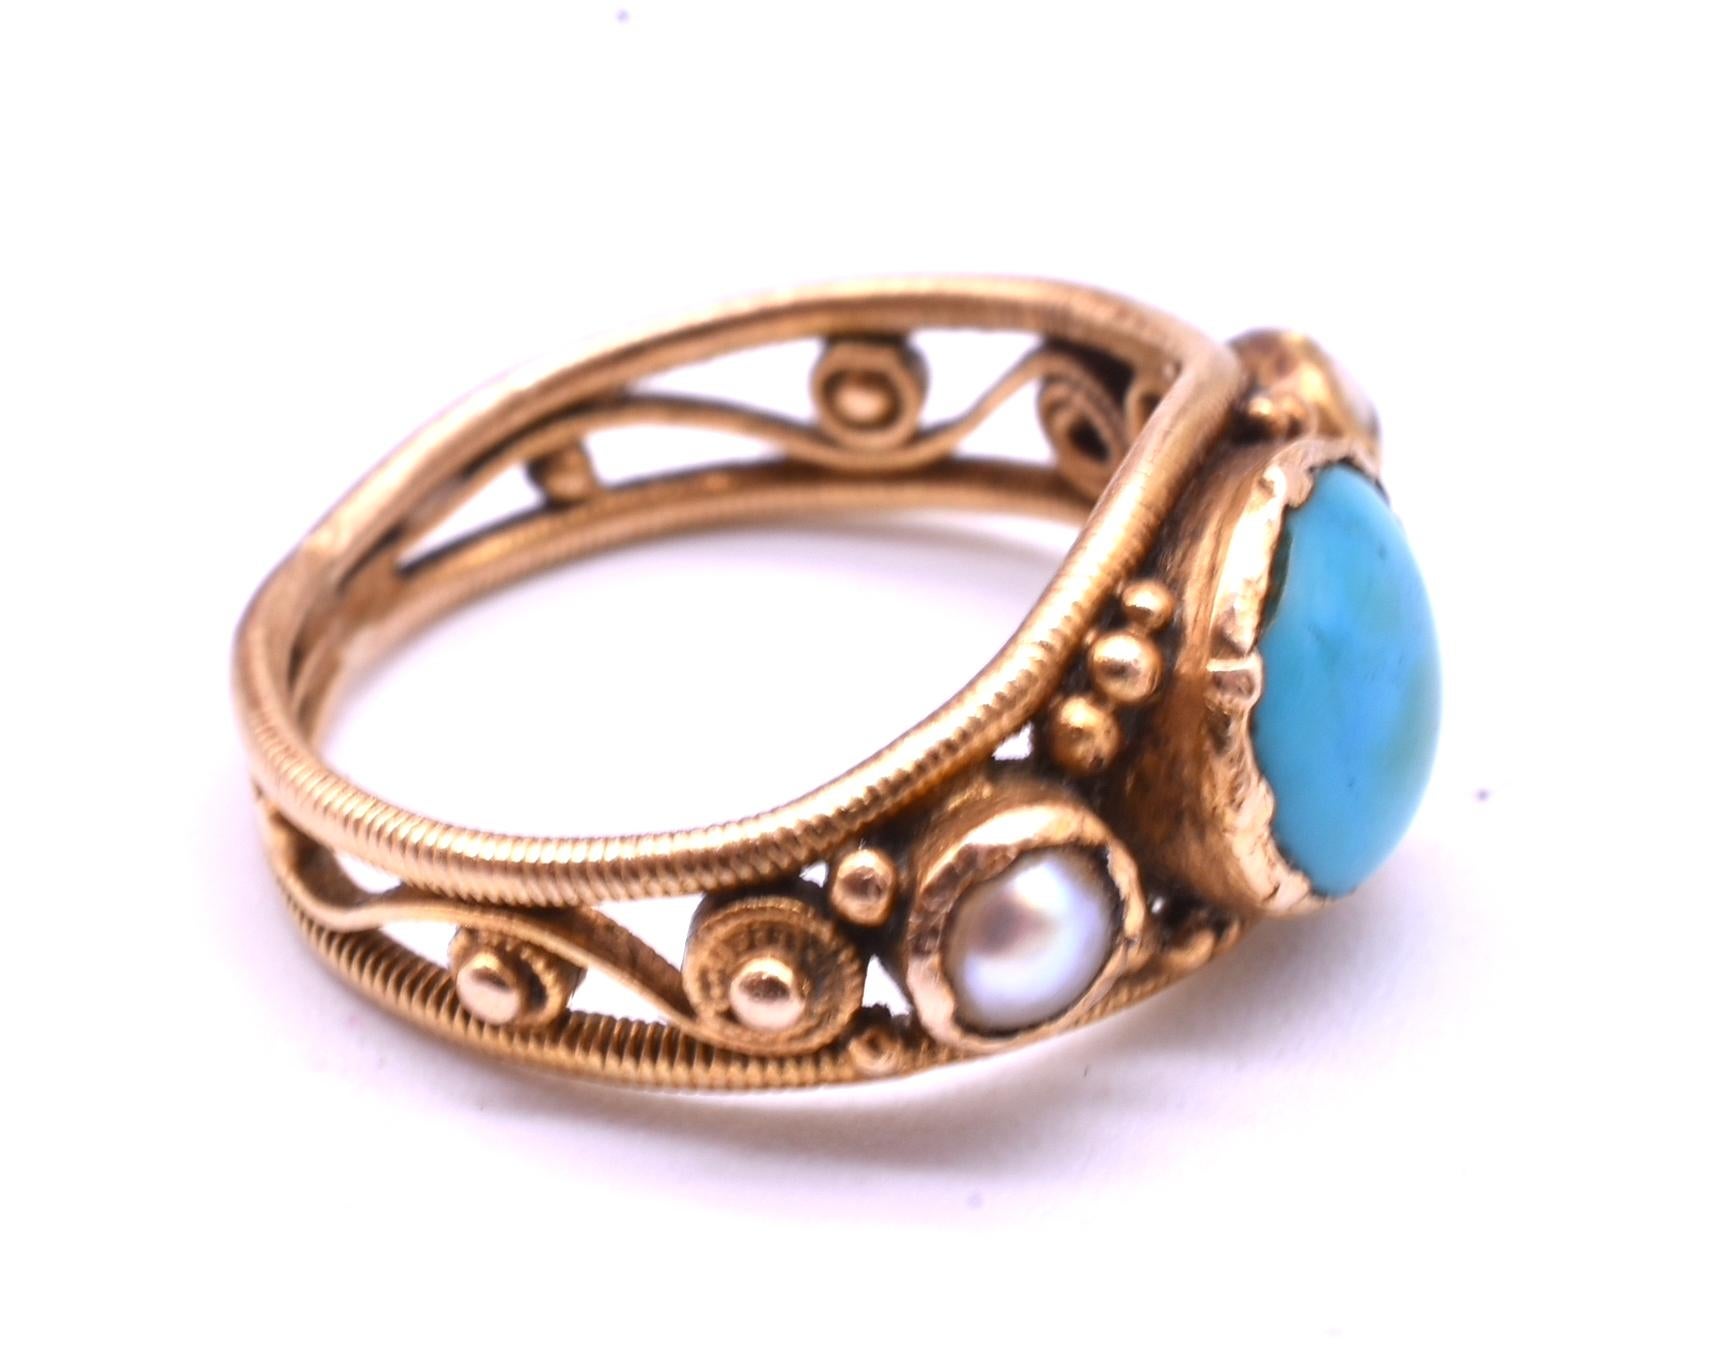 Our early Victorian 15K turquoise and pearl baby ring may be collected in honor of a new baby, worn around the knuckle, or clipped to a split ring and worn around a favorite chain, with or without other baby rings.  Our ring has a center turquoise